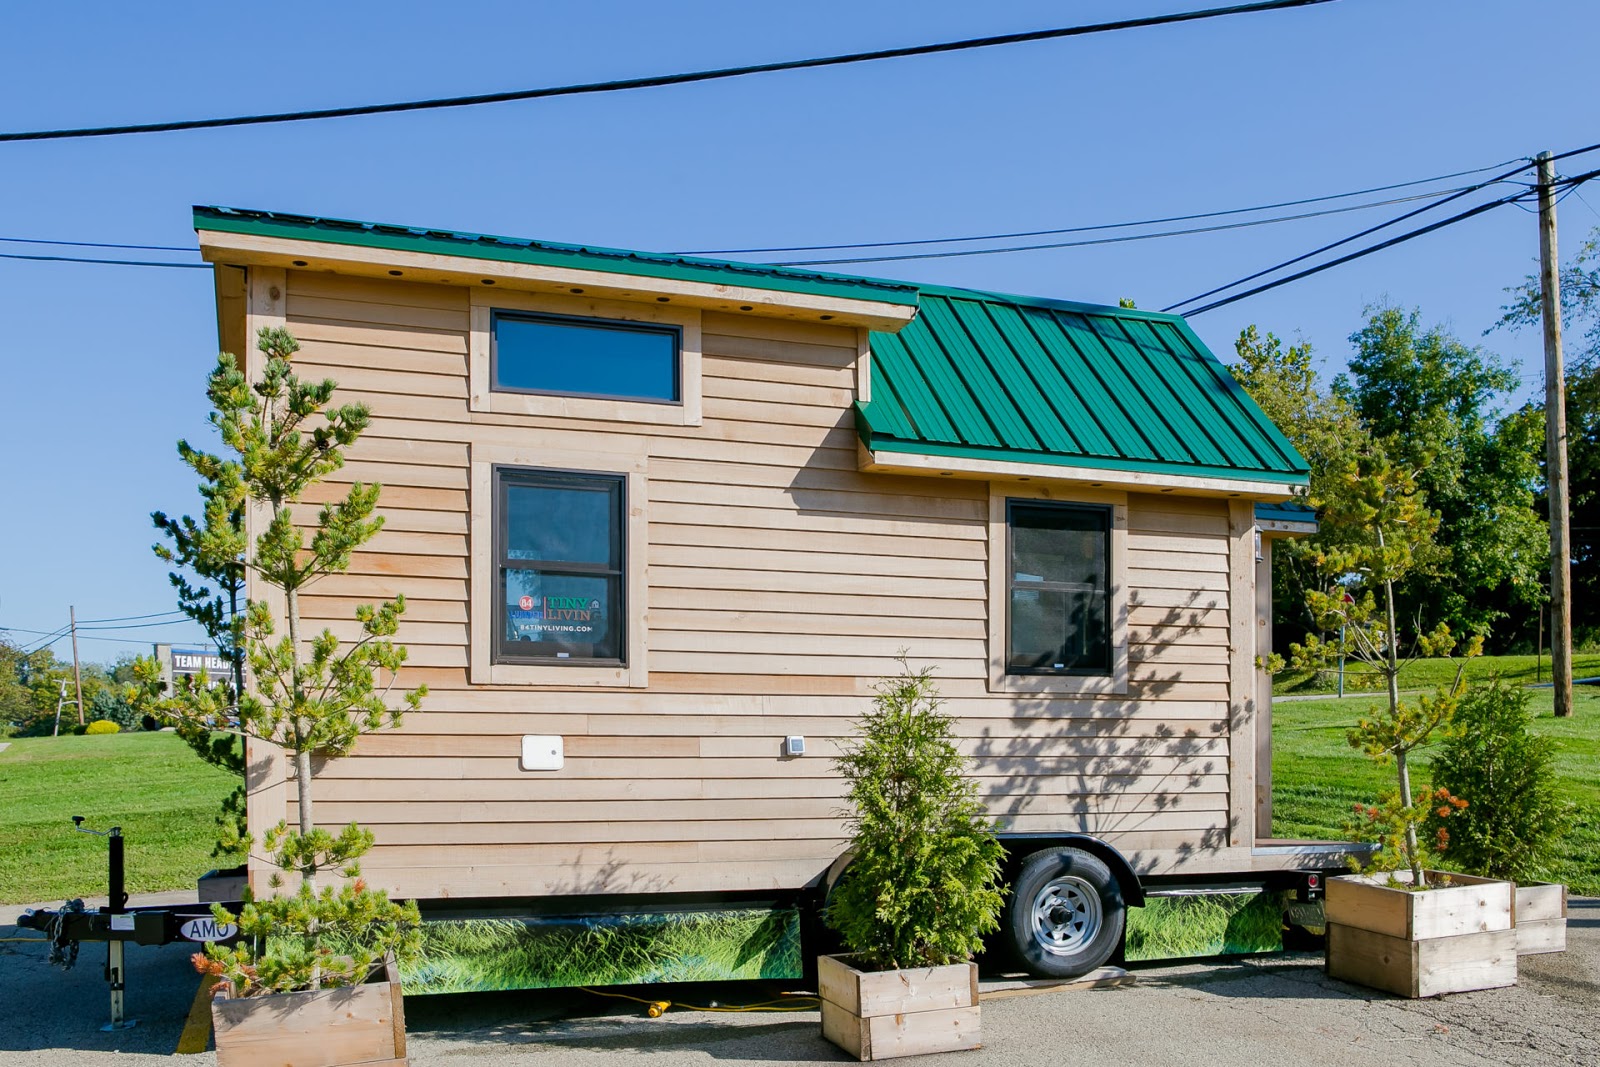 The Roving By 84 Lumber TINY HOUSE TOWN